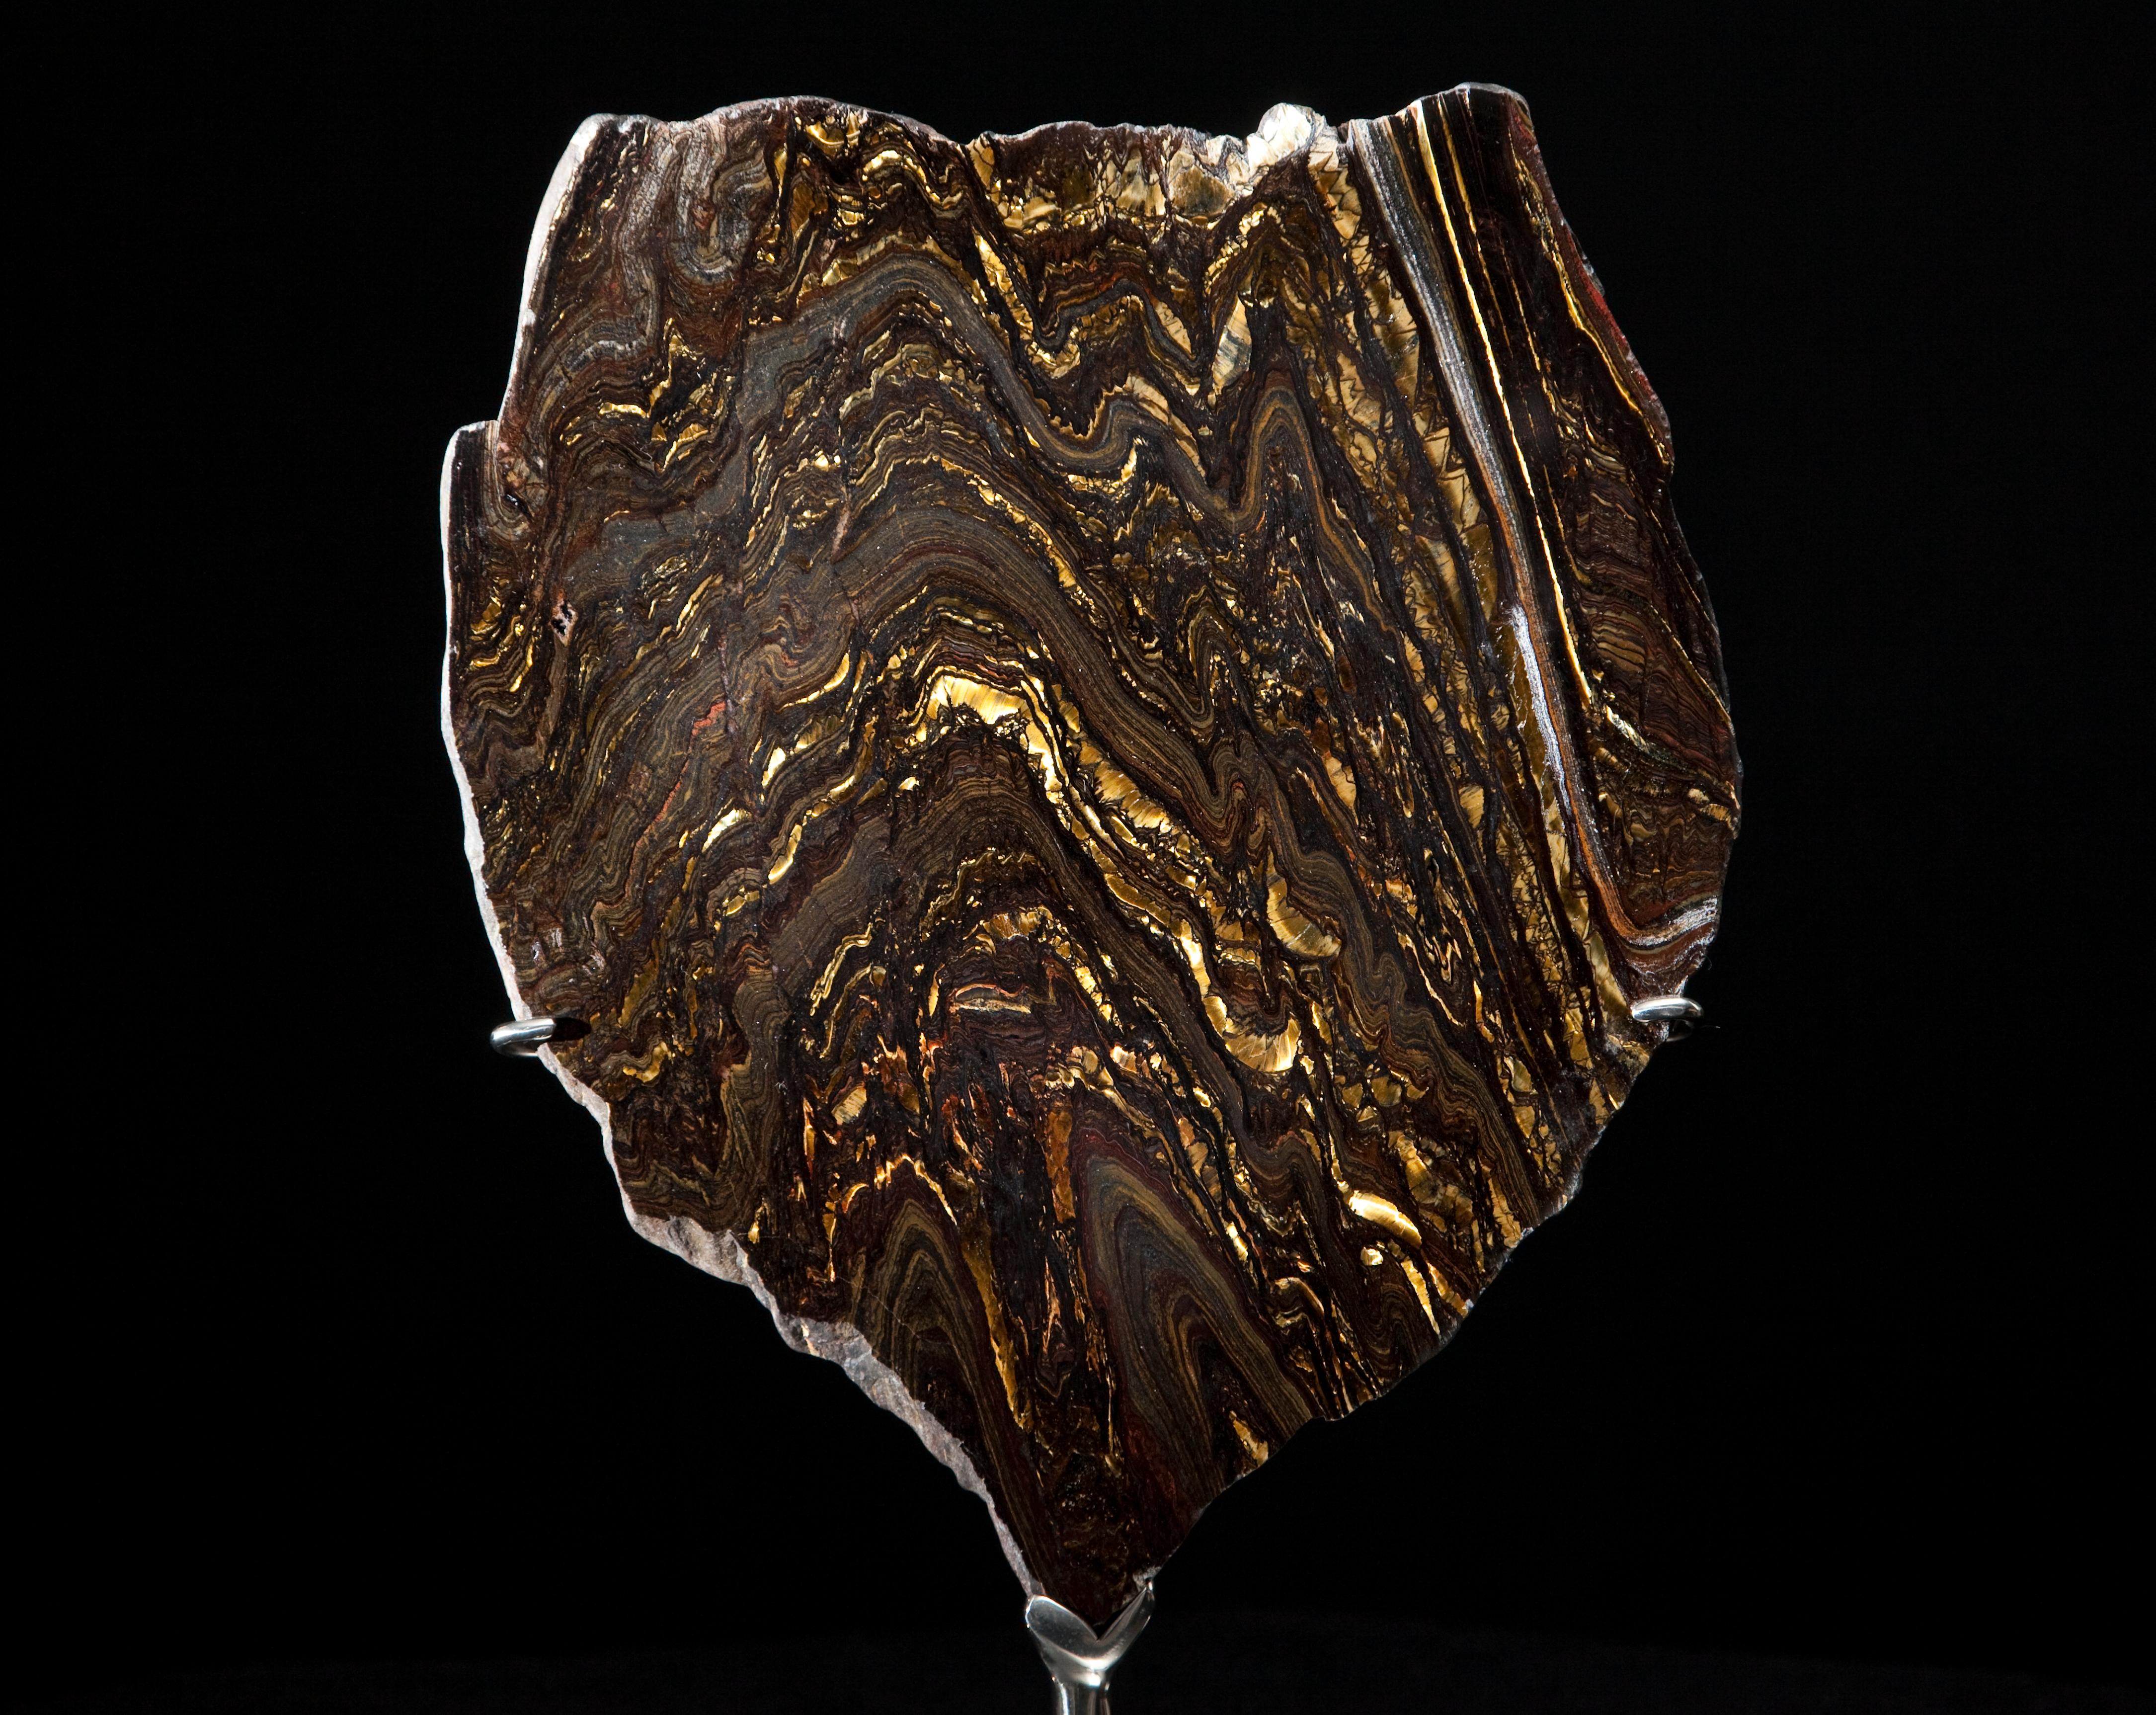 A beautiful stone with black, golden, and red stripes. Tiger iron is a combination of Tiger eye, hematite and jasper.

About Dale Rogers Ammonite

Since 1986 Dale Rogers has been sourcing the grandest fossils, crystals and minerals from around